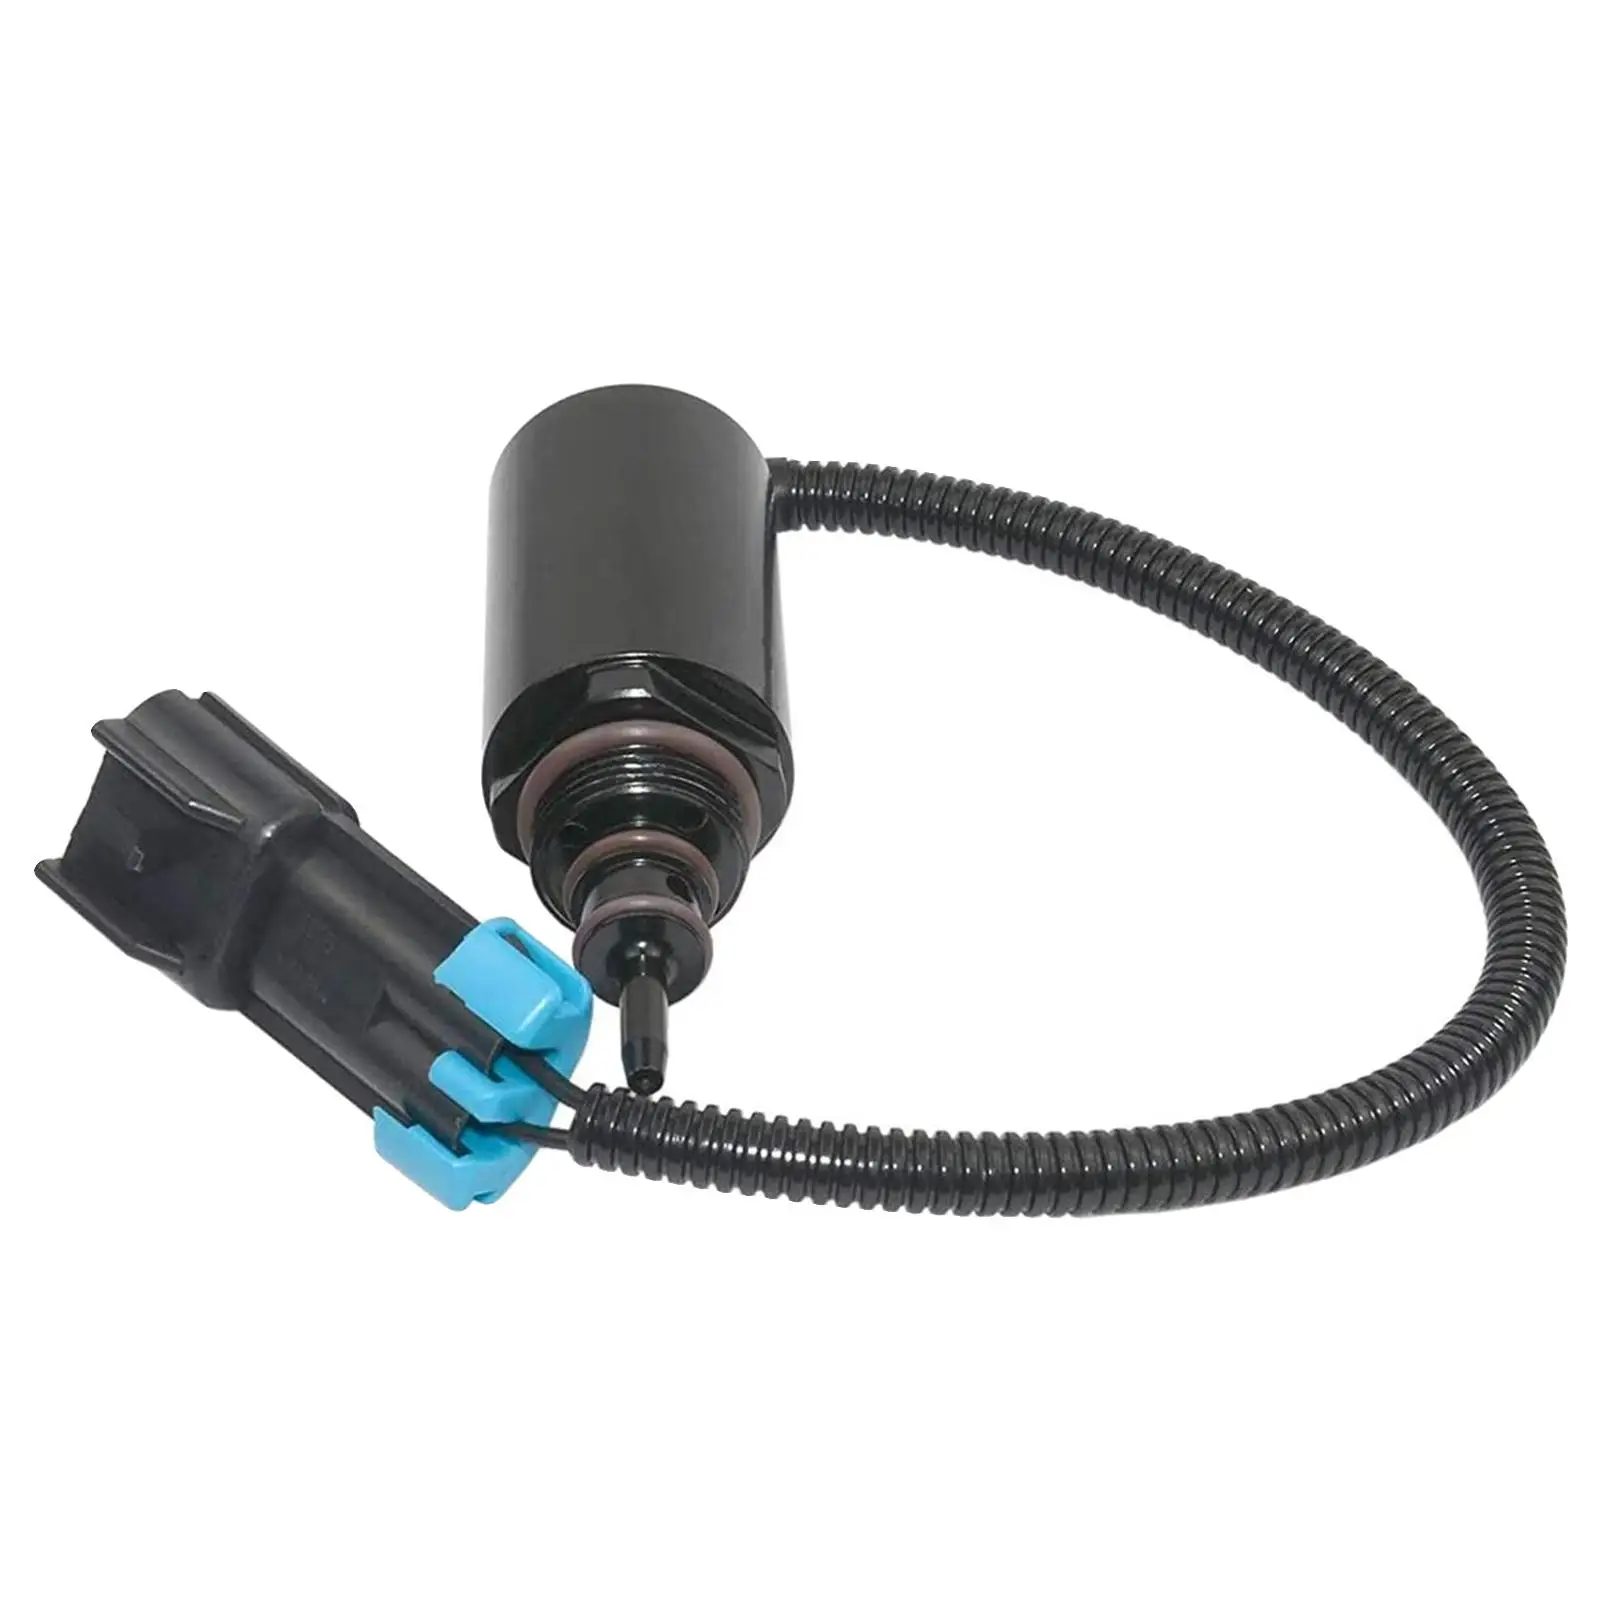  Wastegate Control Solenoid Accessories Easy Installation,   5.9L Diesels 04-2007 ,5140305AA ,4036054, He351CW